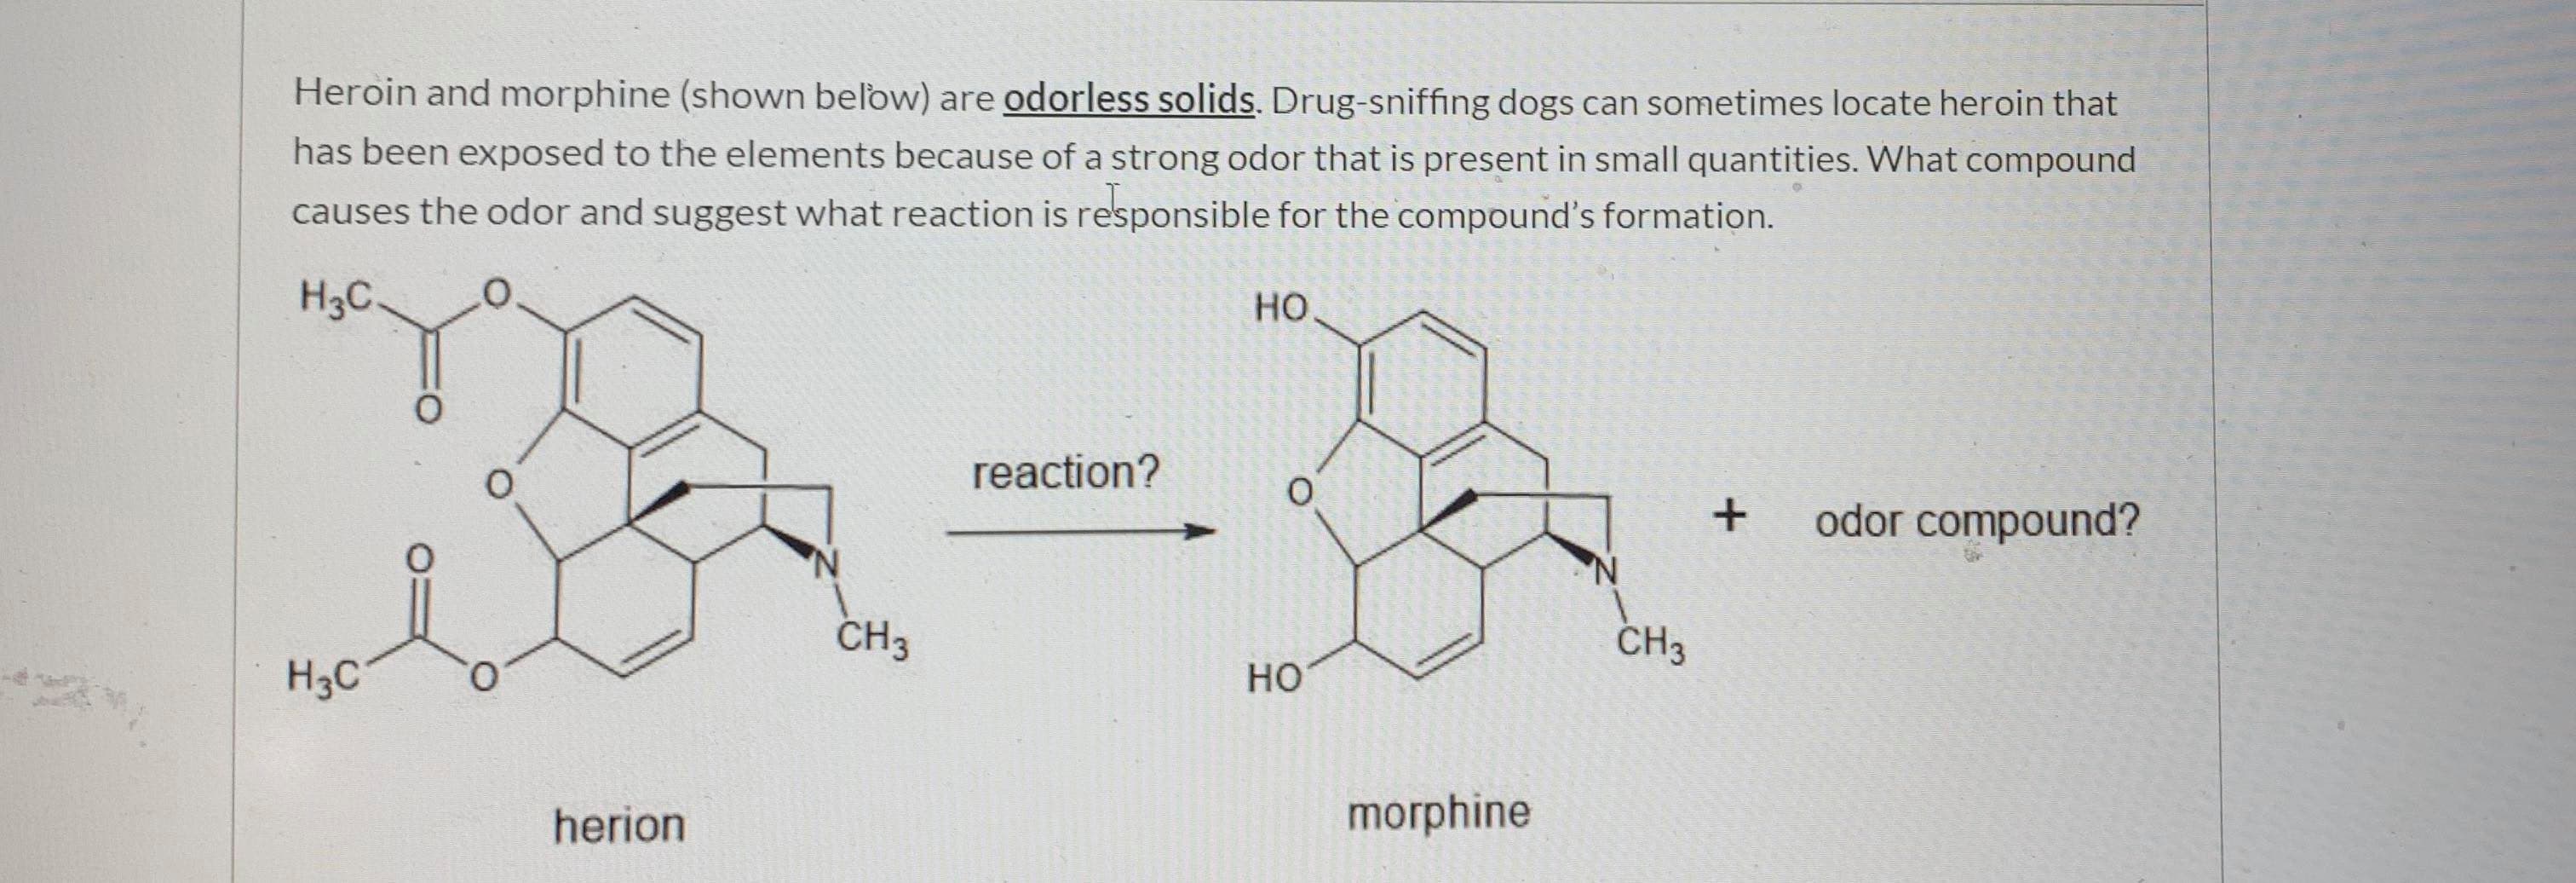 Heroin and morphine (shown below) are odorless solids. Drug-sniffing dogs can sometimes locate heroin that
has been exposed to the elements because of a strong odor that is present in small quantities. What compound
causes the odor and suggest what reaction is responsible for the compound's formation.
H3C.
но
reaction?
odor compound?
'N.
CHз
CHз
H3C
но
herion
morphine
